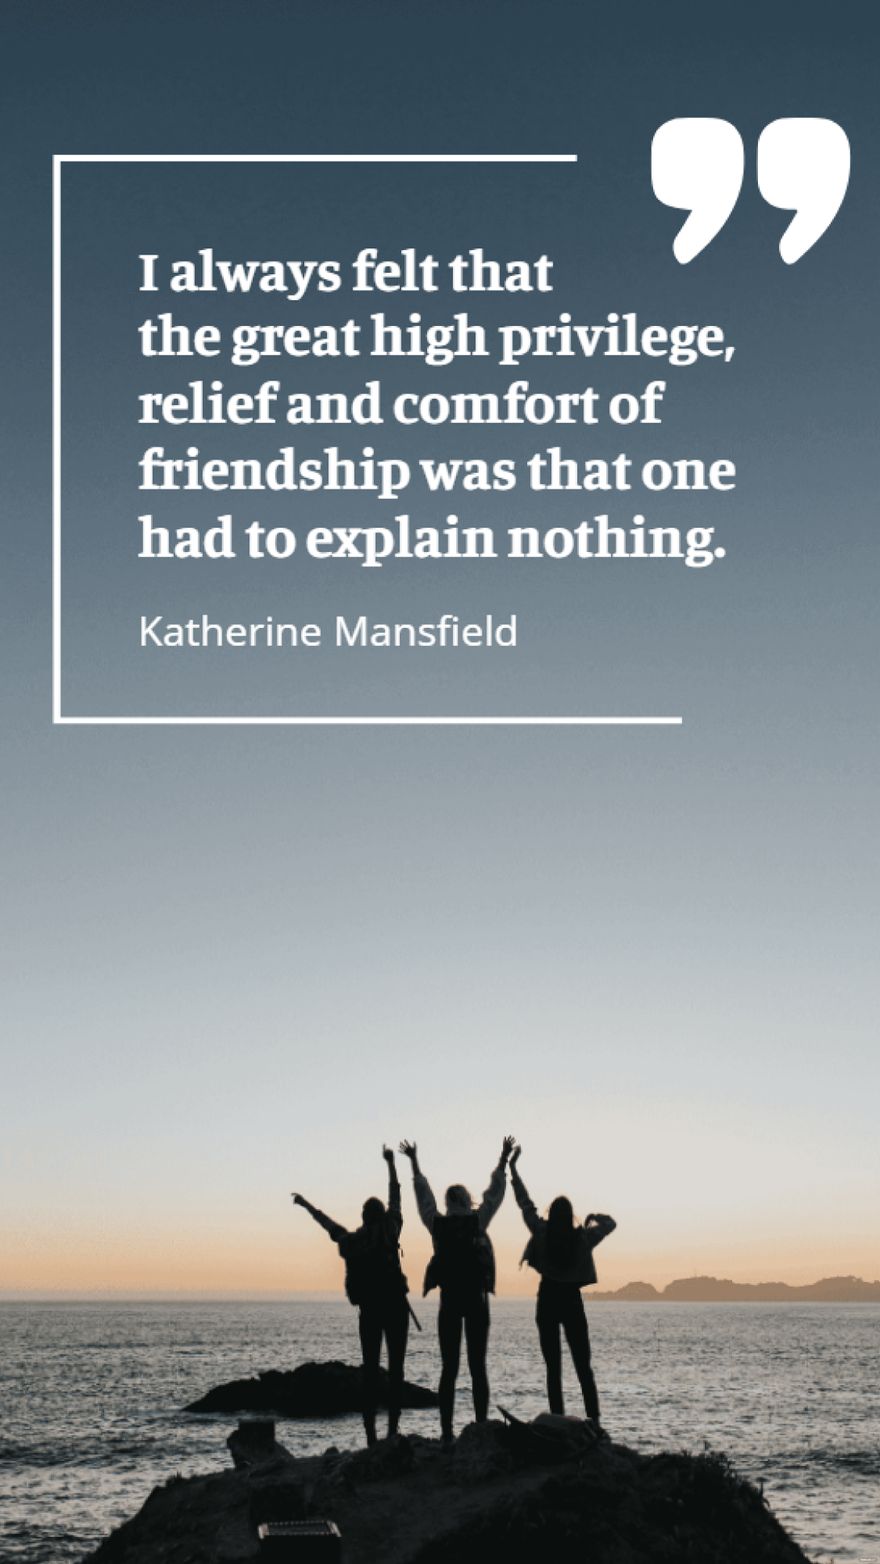 Free Katherine Mansfield - I always felt that the great high privilege, relief and comfort of friendship was that one had to explain nothing. in JPG